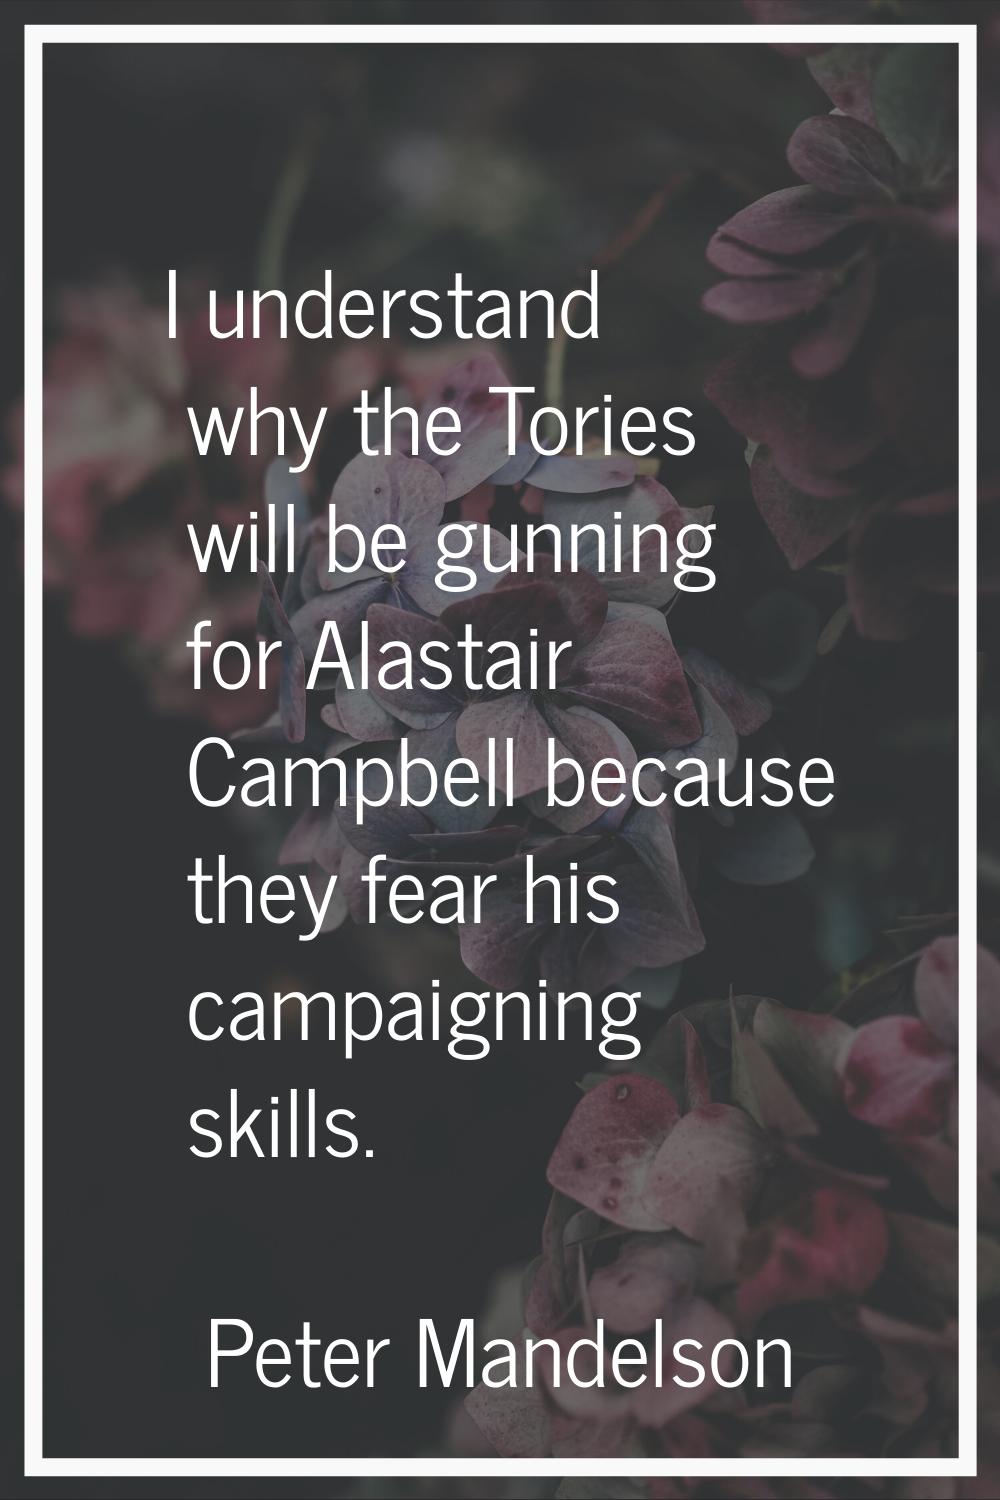 I understand why the Tories will be gunning for Alastair Campbell because they fear his campaigning